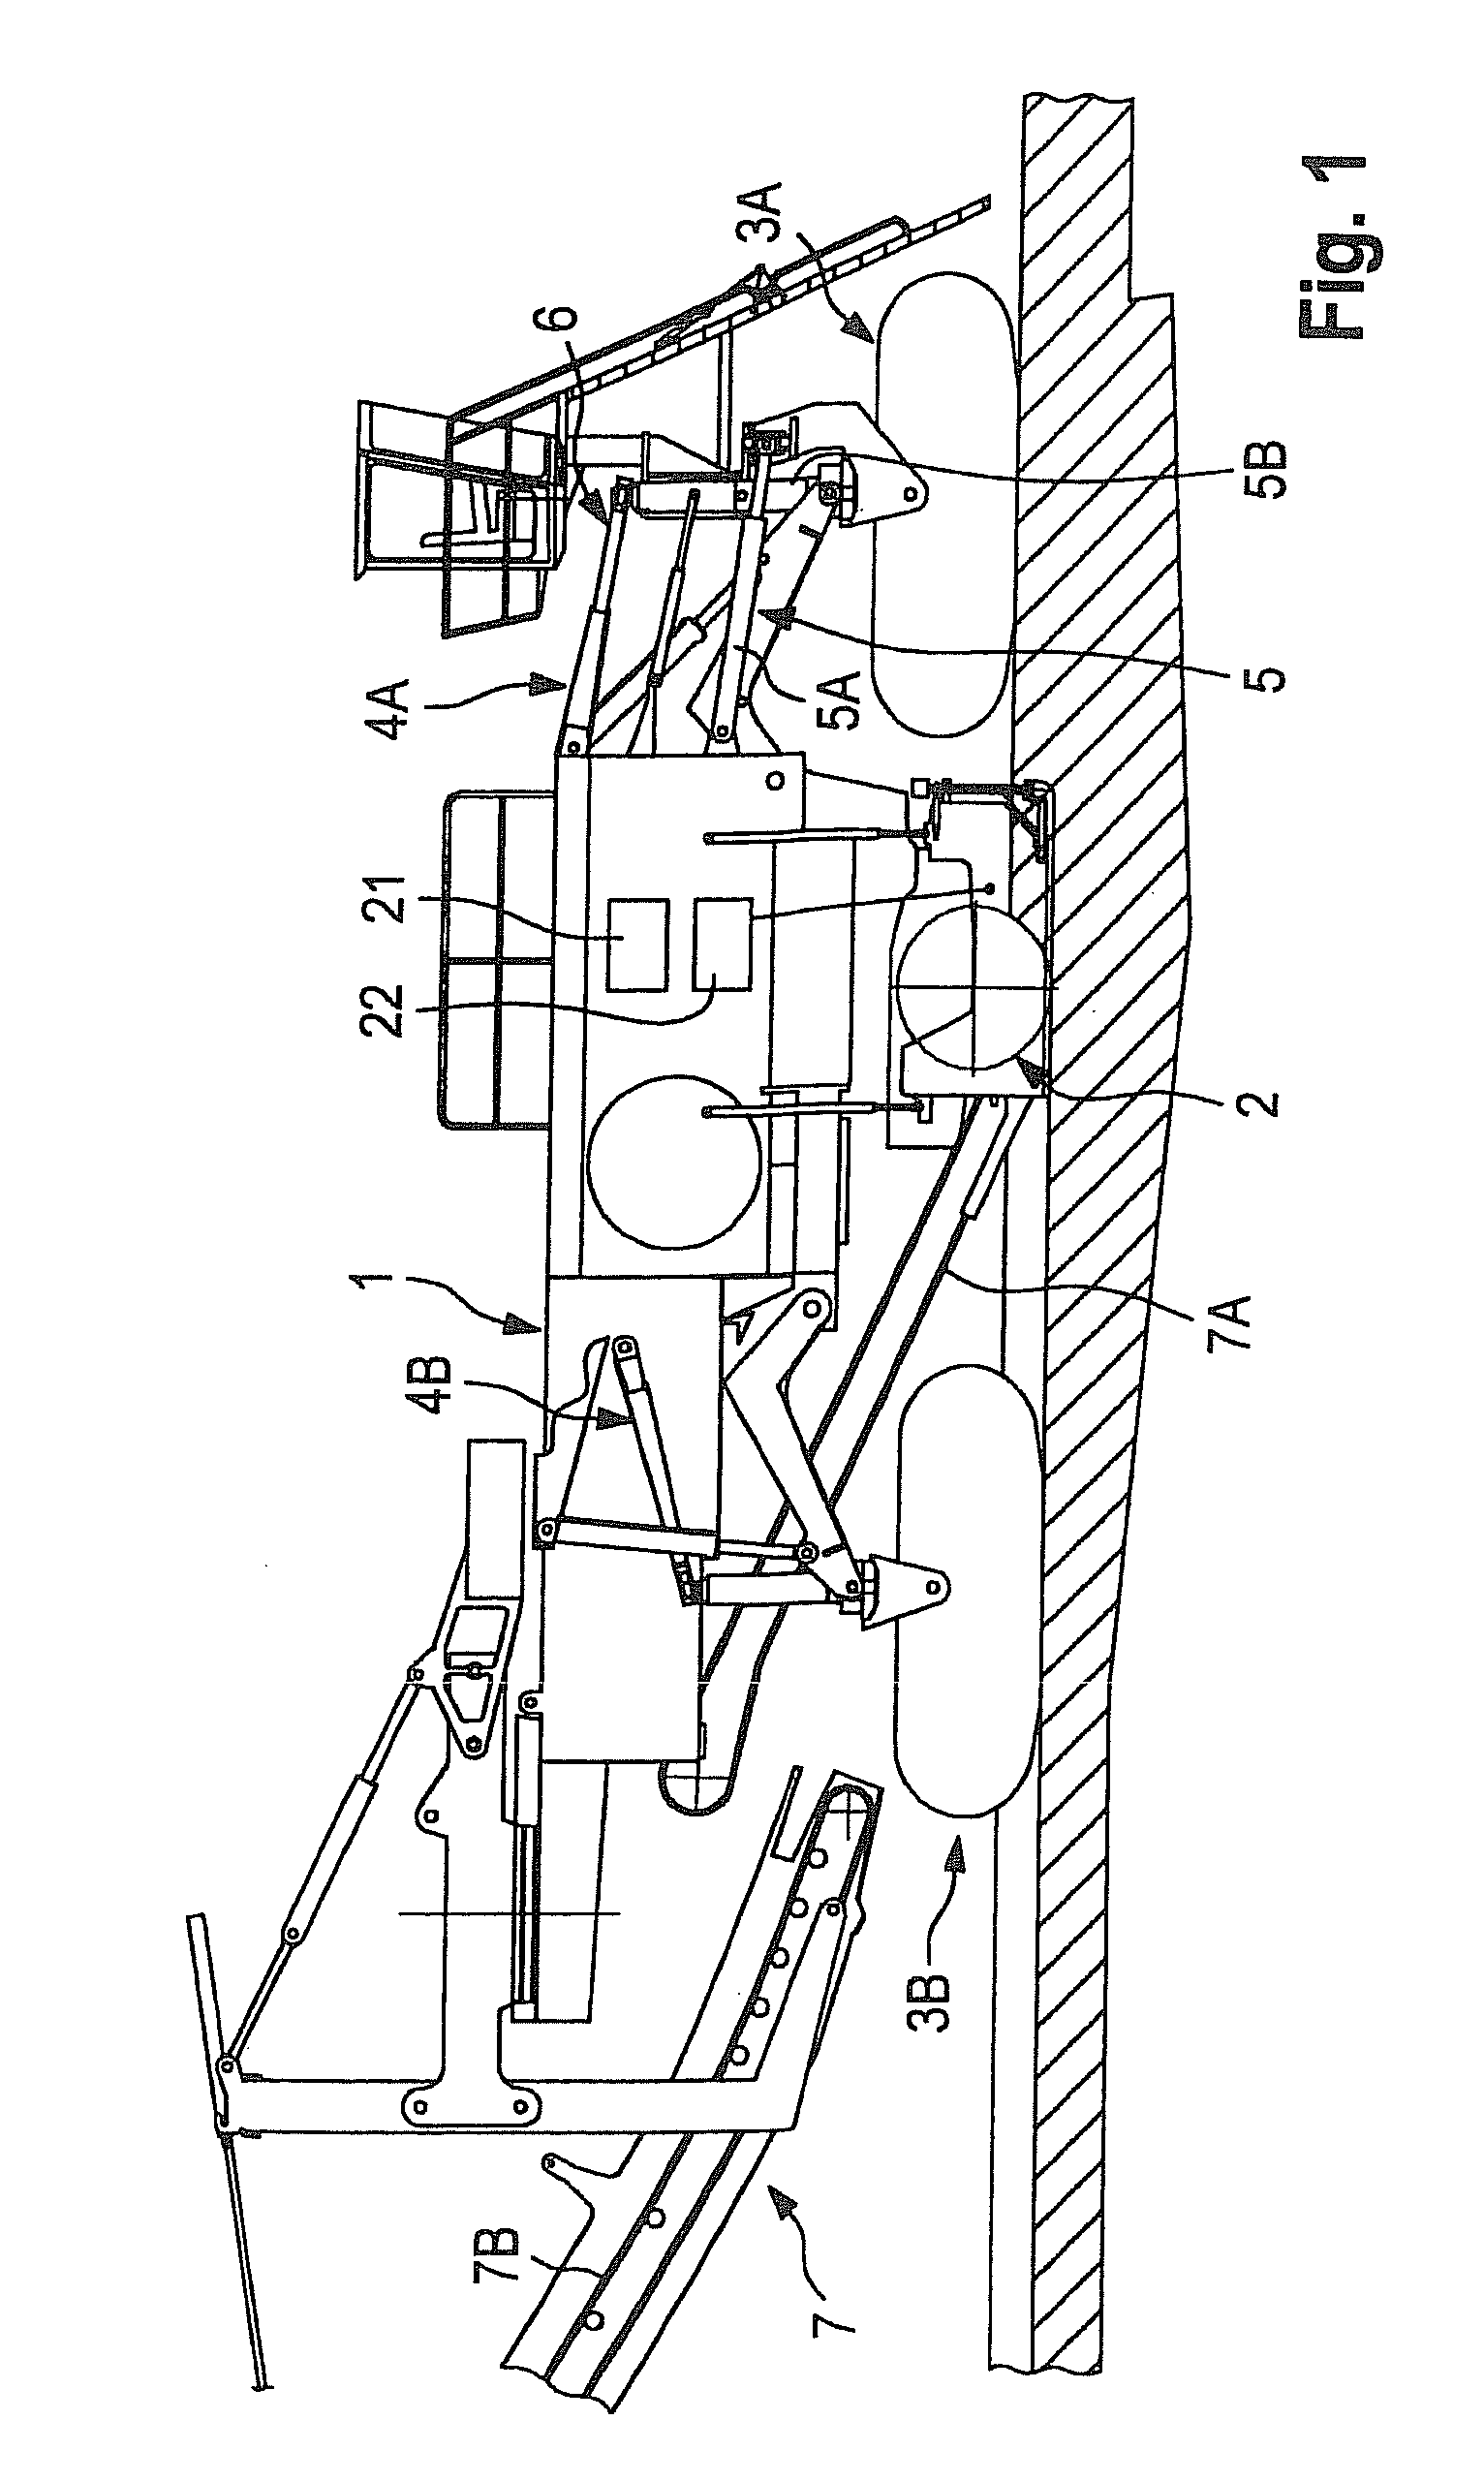 Road-milling machine or machine for working deposits